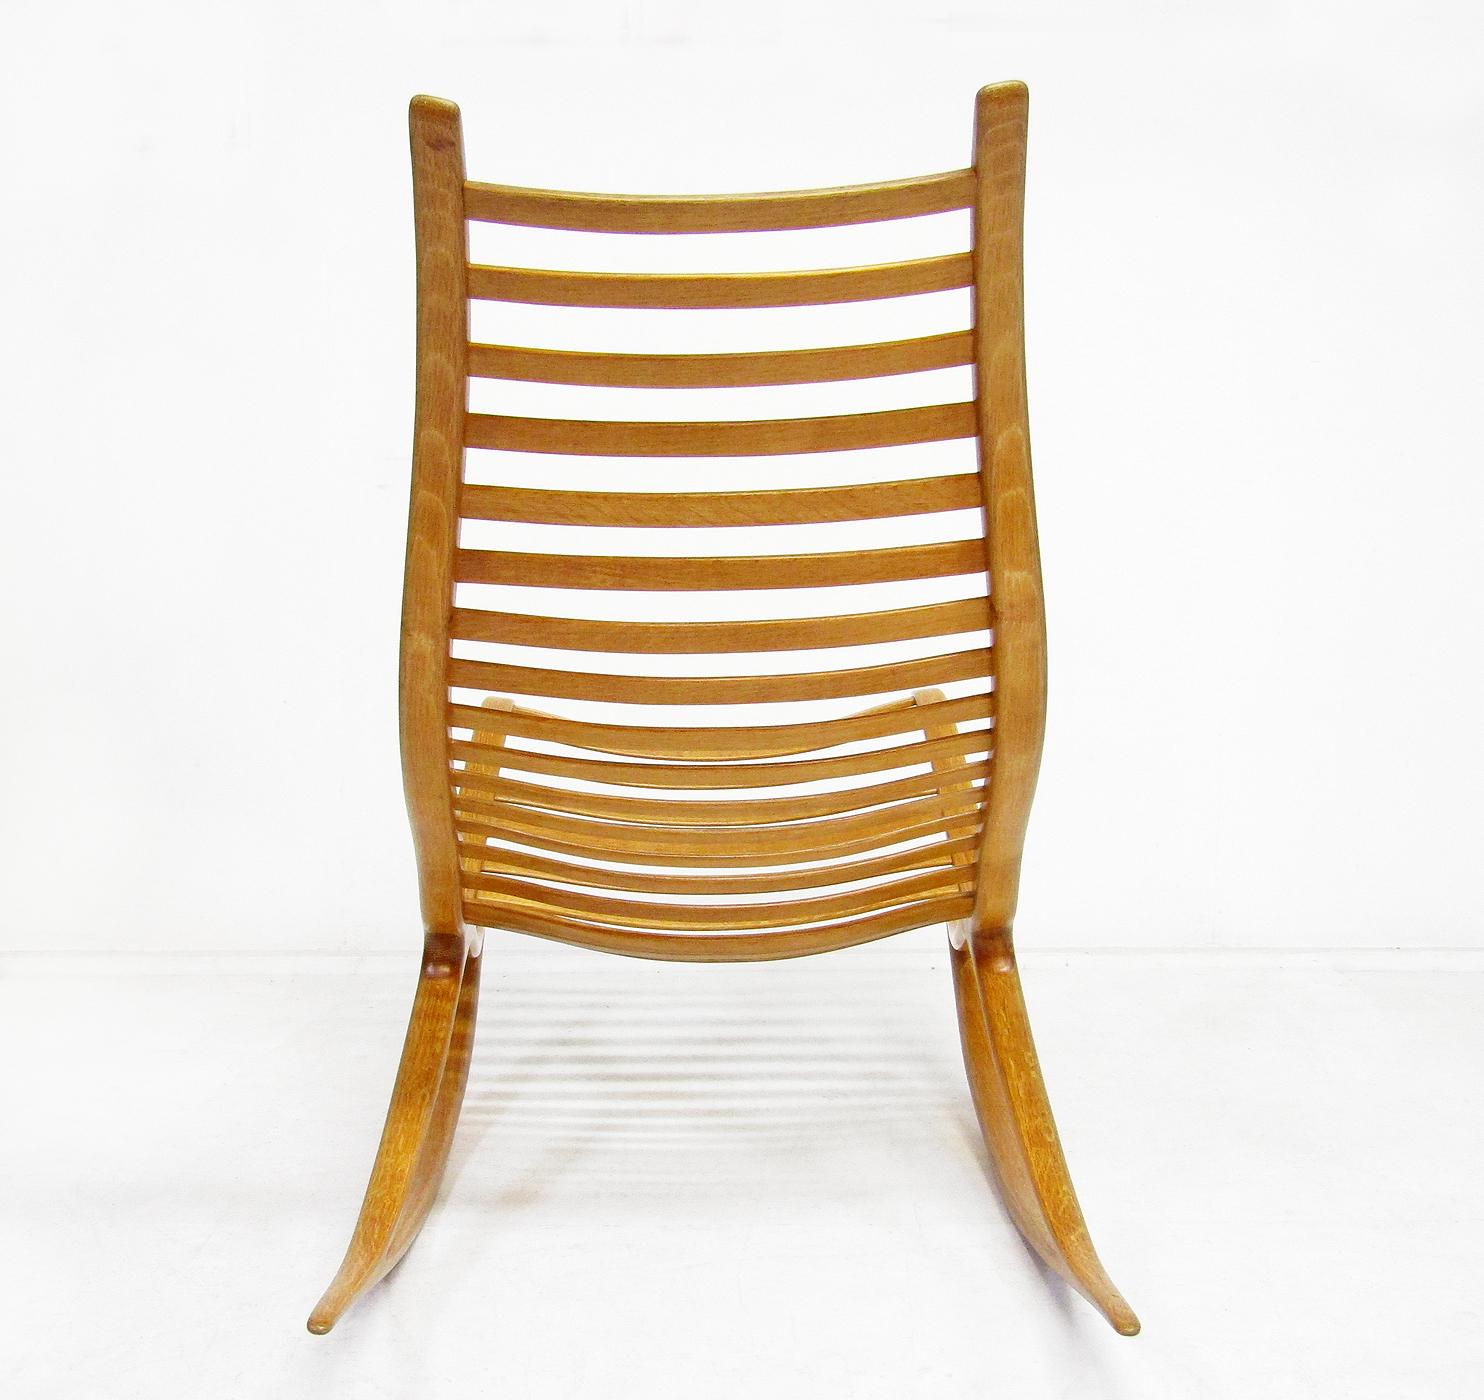 Sculptural 1960s Wishbone Rocking Chair In Oak By Robin Williams For Sale 4